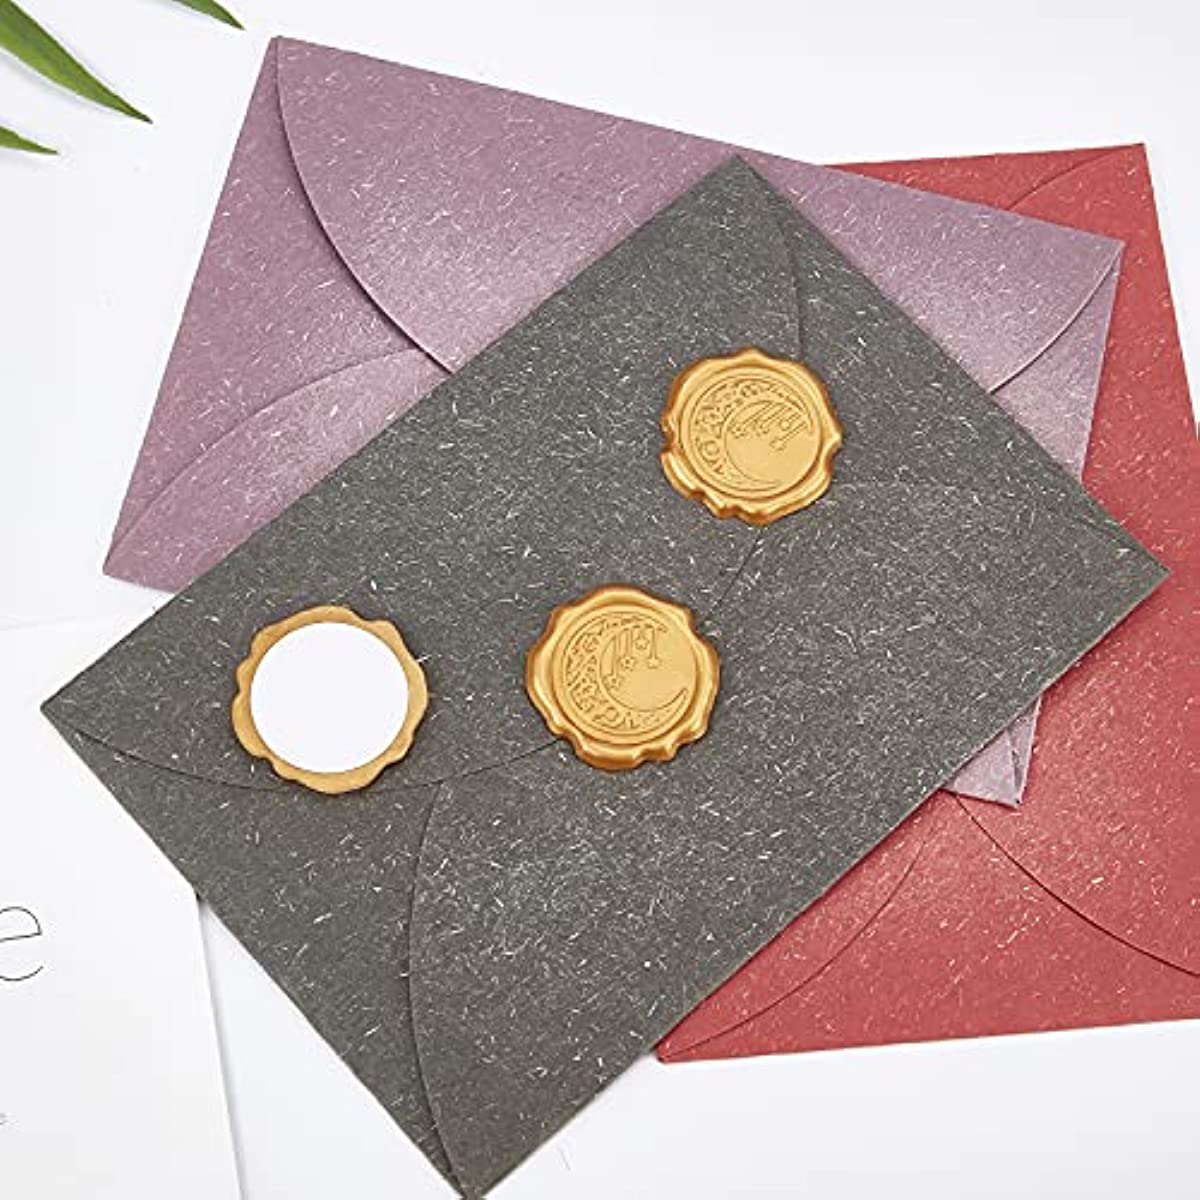 Adhesive Wax Seal Stickers 25PCS Moon Stars Self- Adhesive Wax Seals  Decorative Stamp Stickers Envelope Stickers for Decor Wedding Invitation  Envelopes Craft Scrapbook Party Gift-Goldenrod 